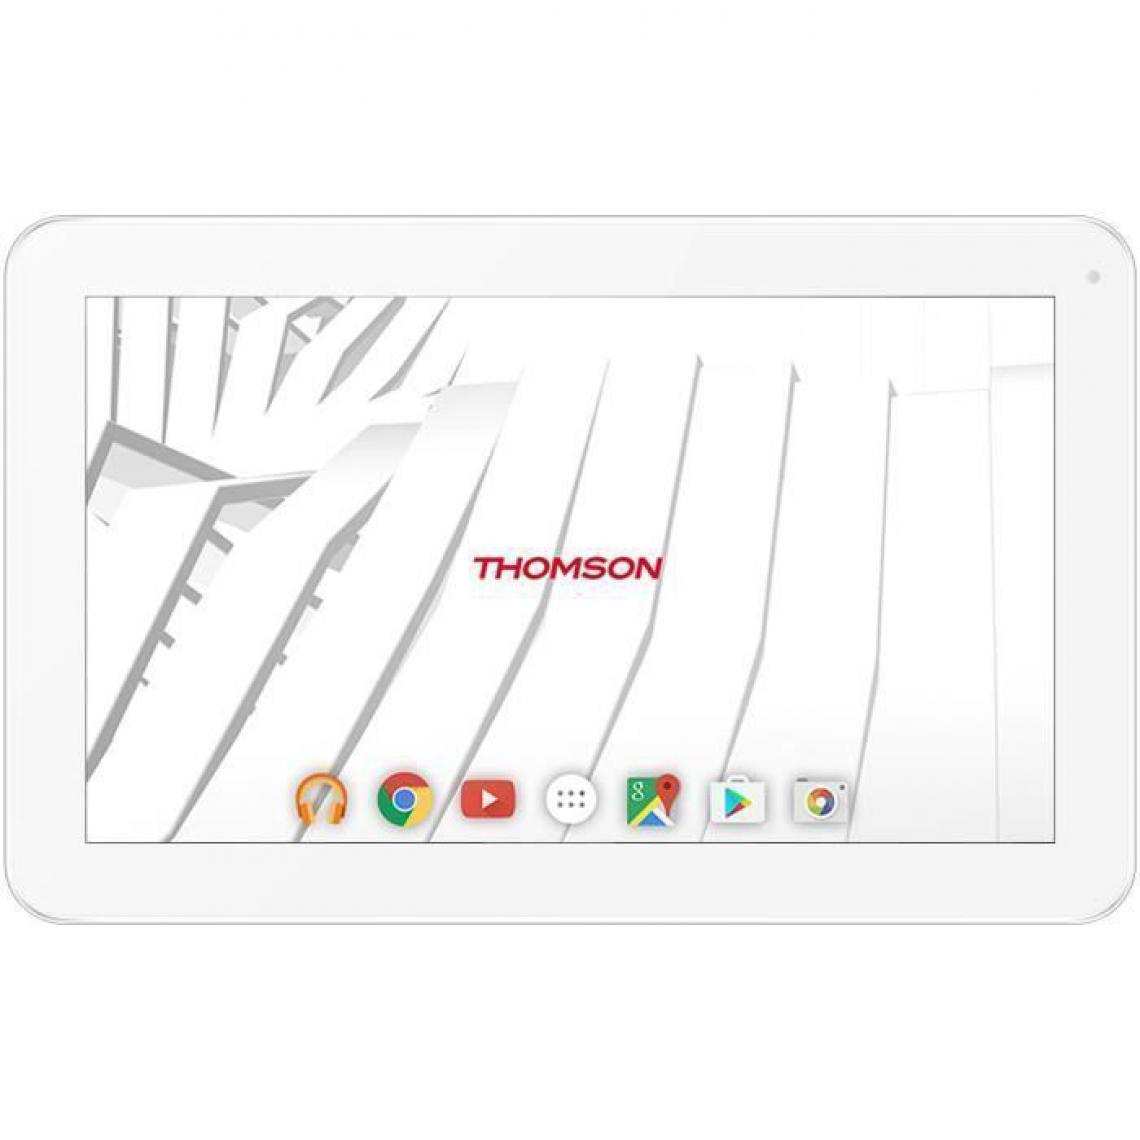 Thomson - THOMSON Tablette tactile TEO 10 - Ecran 10 - 1 Go de RAM - Android 7.1 - CPU Rockship RK3126 - Stockage 32 Go - WiFi - Blanche - Tablette Android